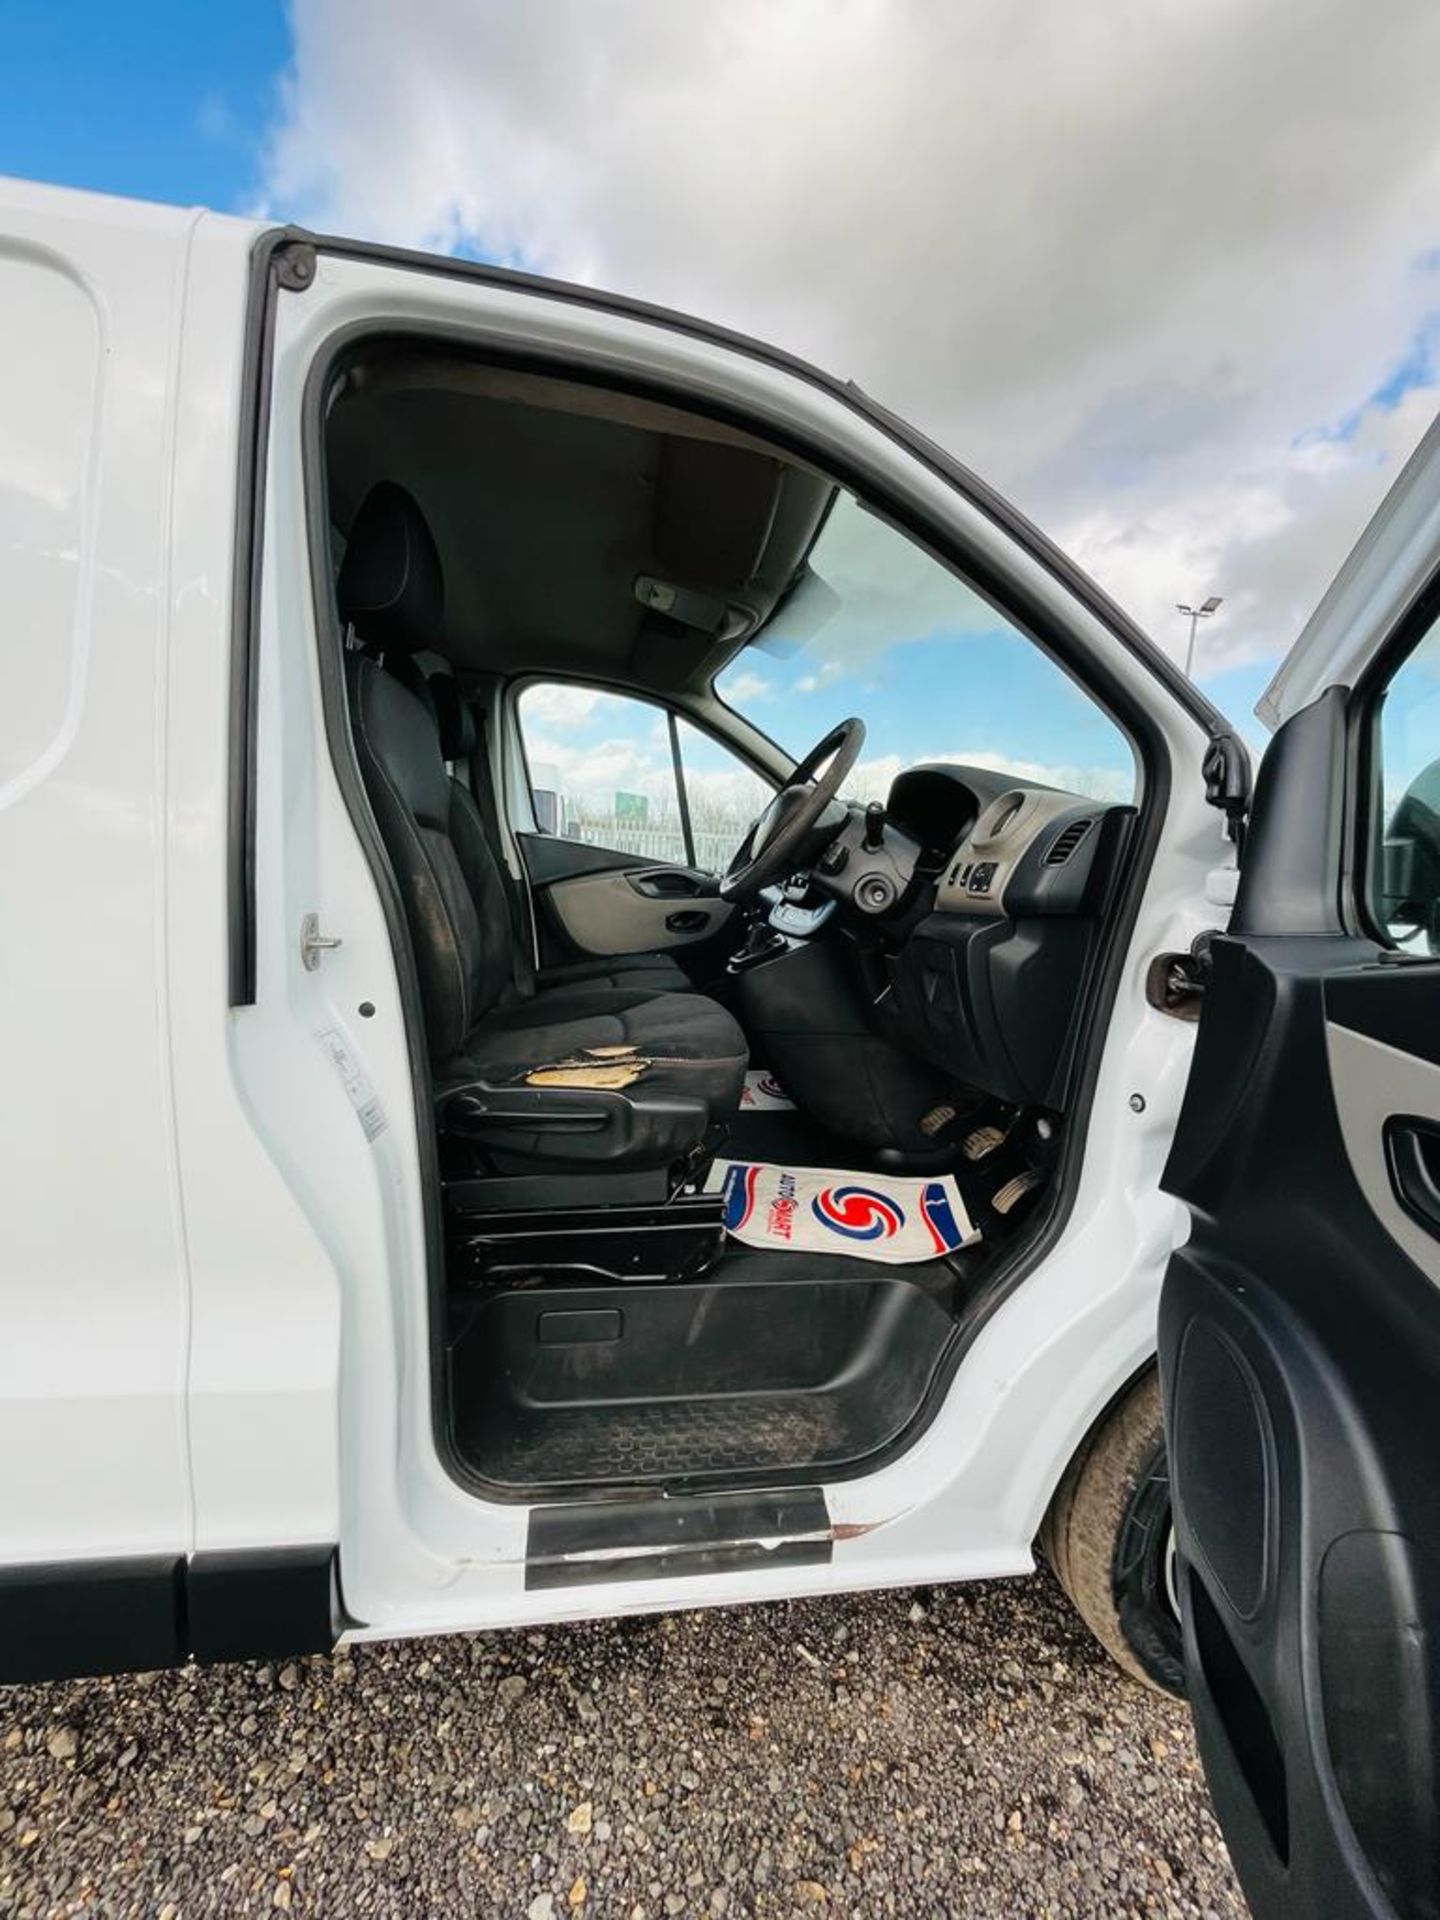 ** ON SALE ** Renault Trafic SL27 Business + 1.6 DCI 115 L1 H1 2016 '16 Reg' -A/C- Only 69794 Miles - Image 14 of 25